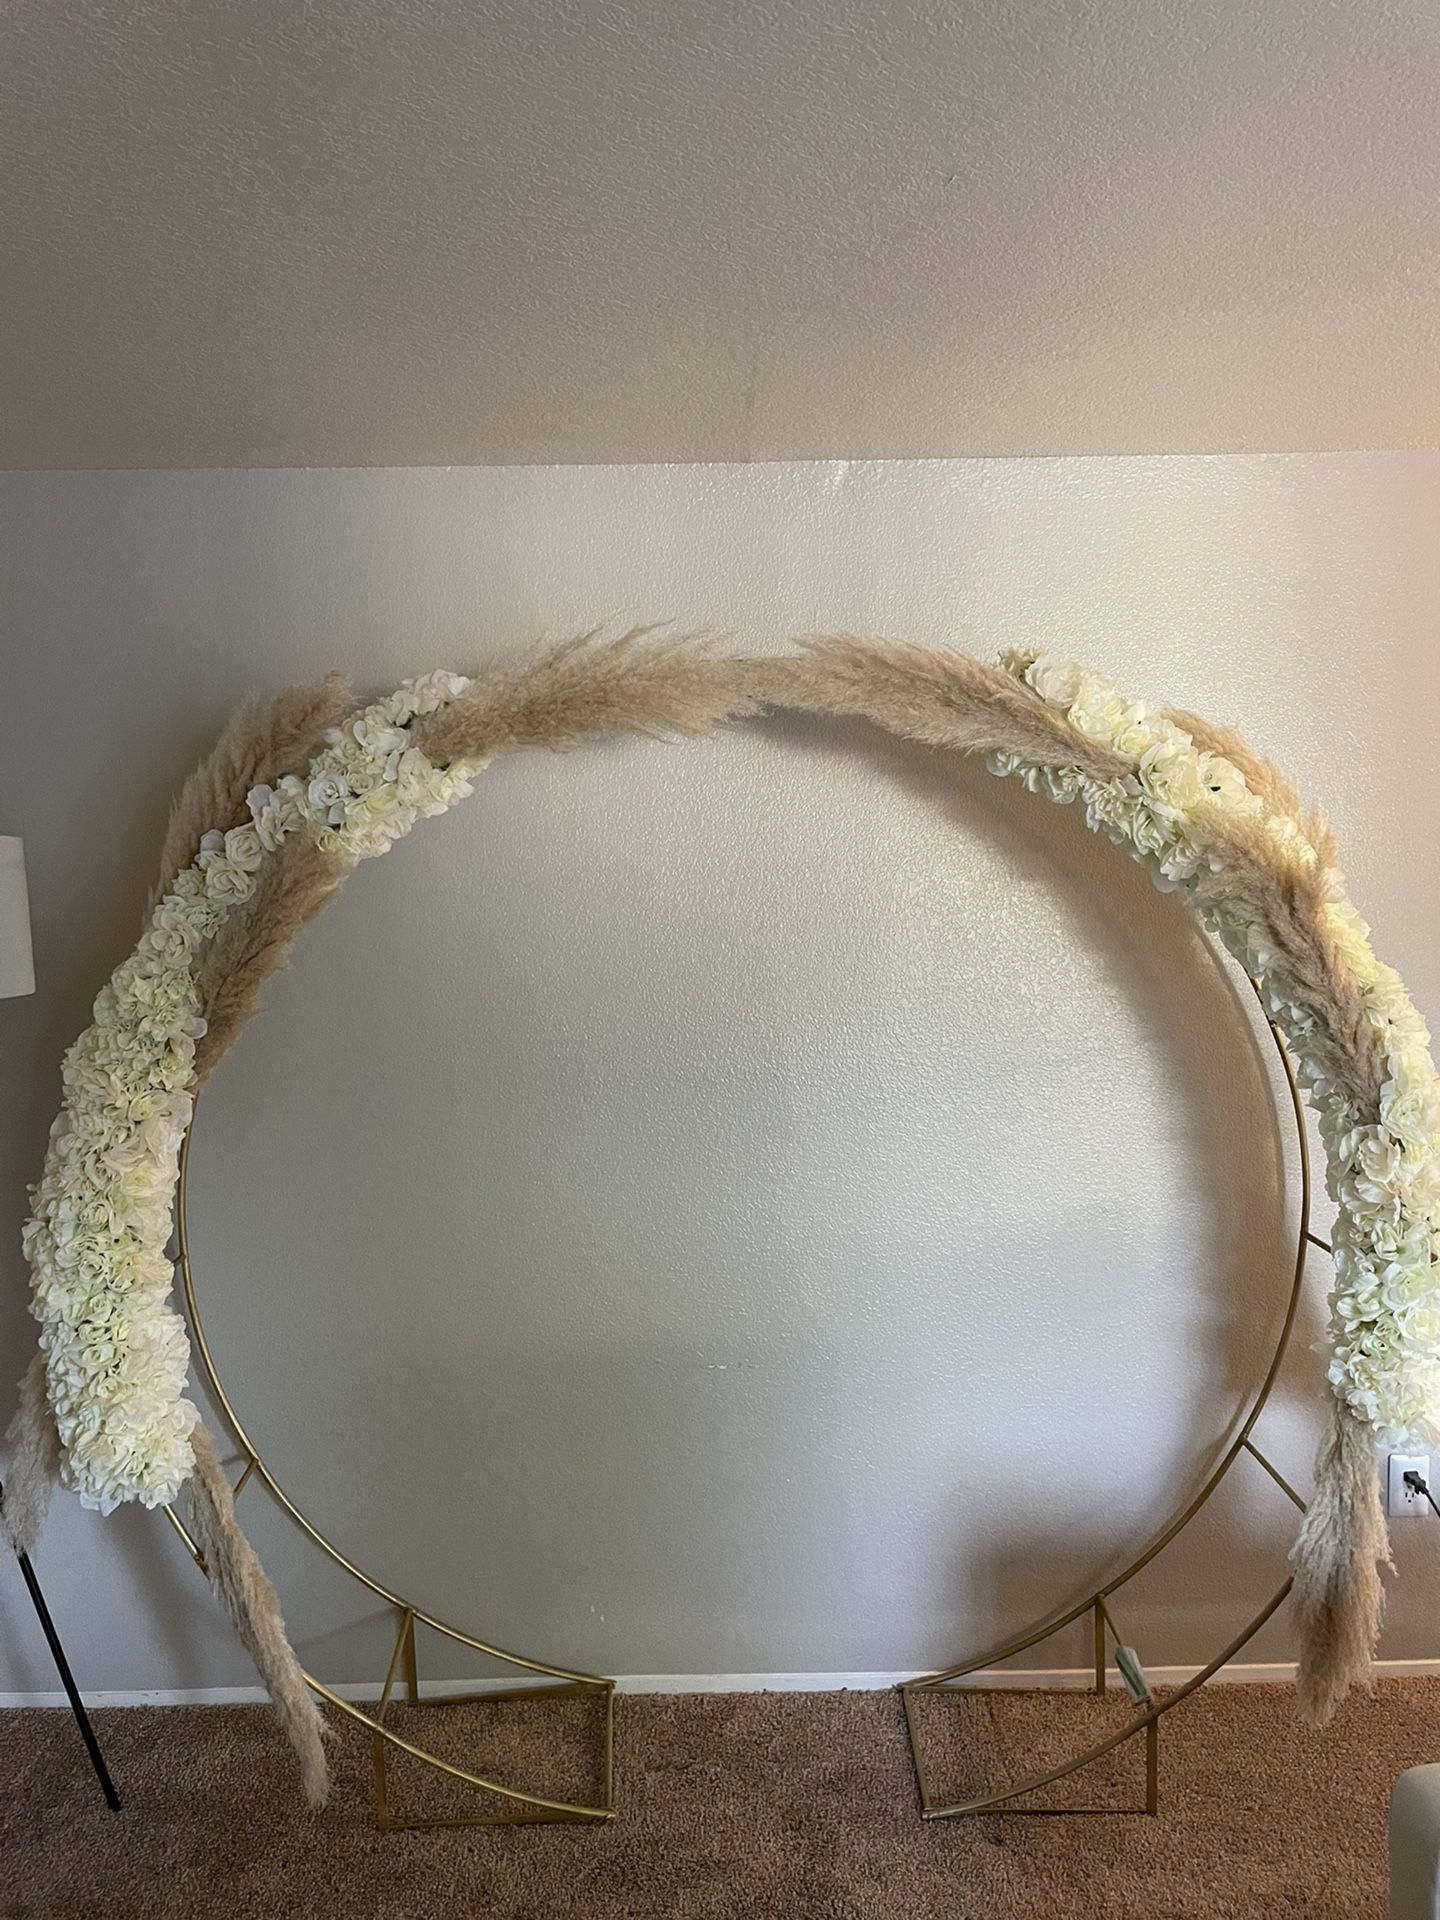 GOLD WEDDING ARBOR WITH WHITE ROSES AND PAMPAS GRASS